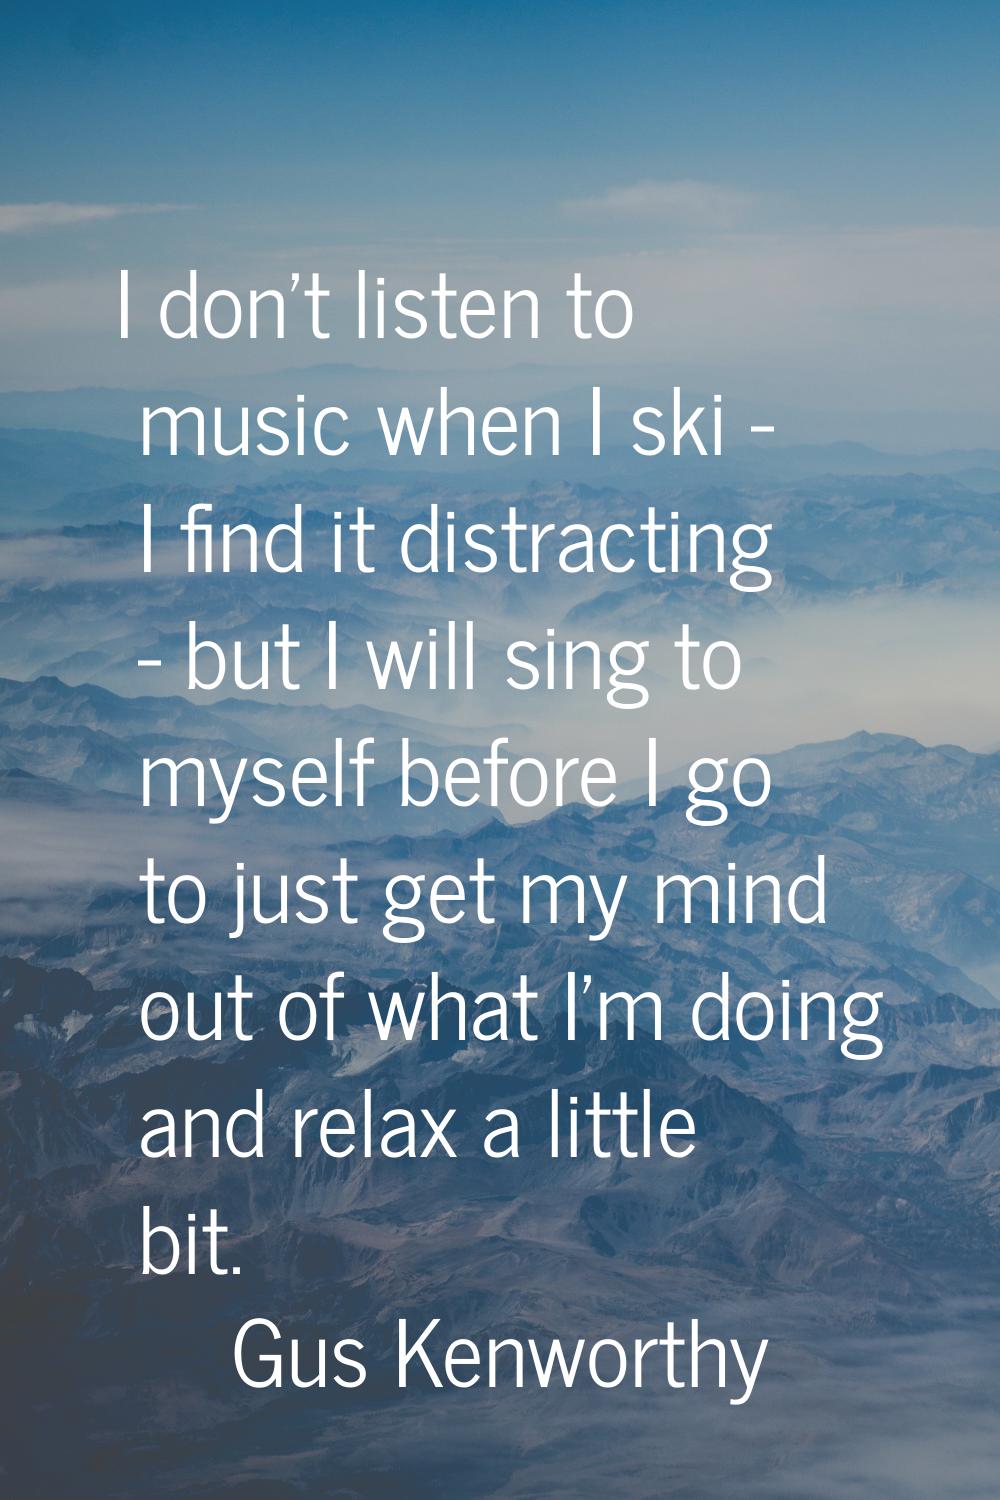 I don't listen to music when I ski - I find it distracting - but I will sing to myself before I go 